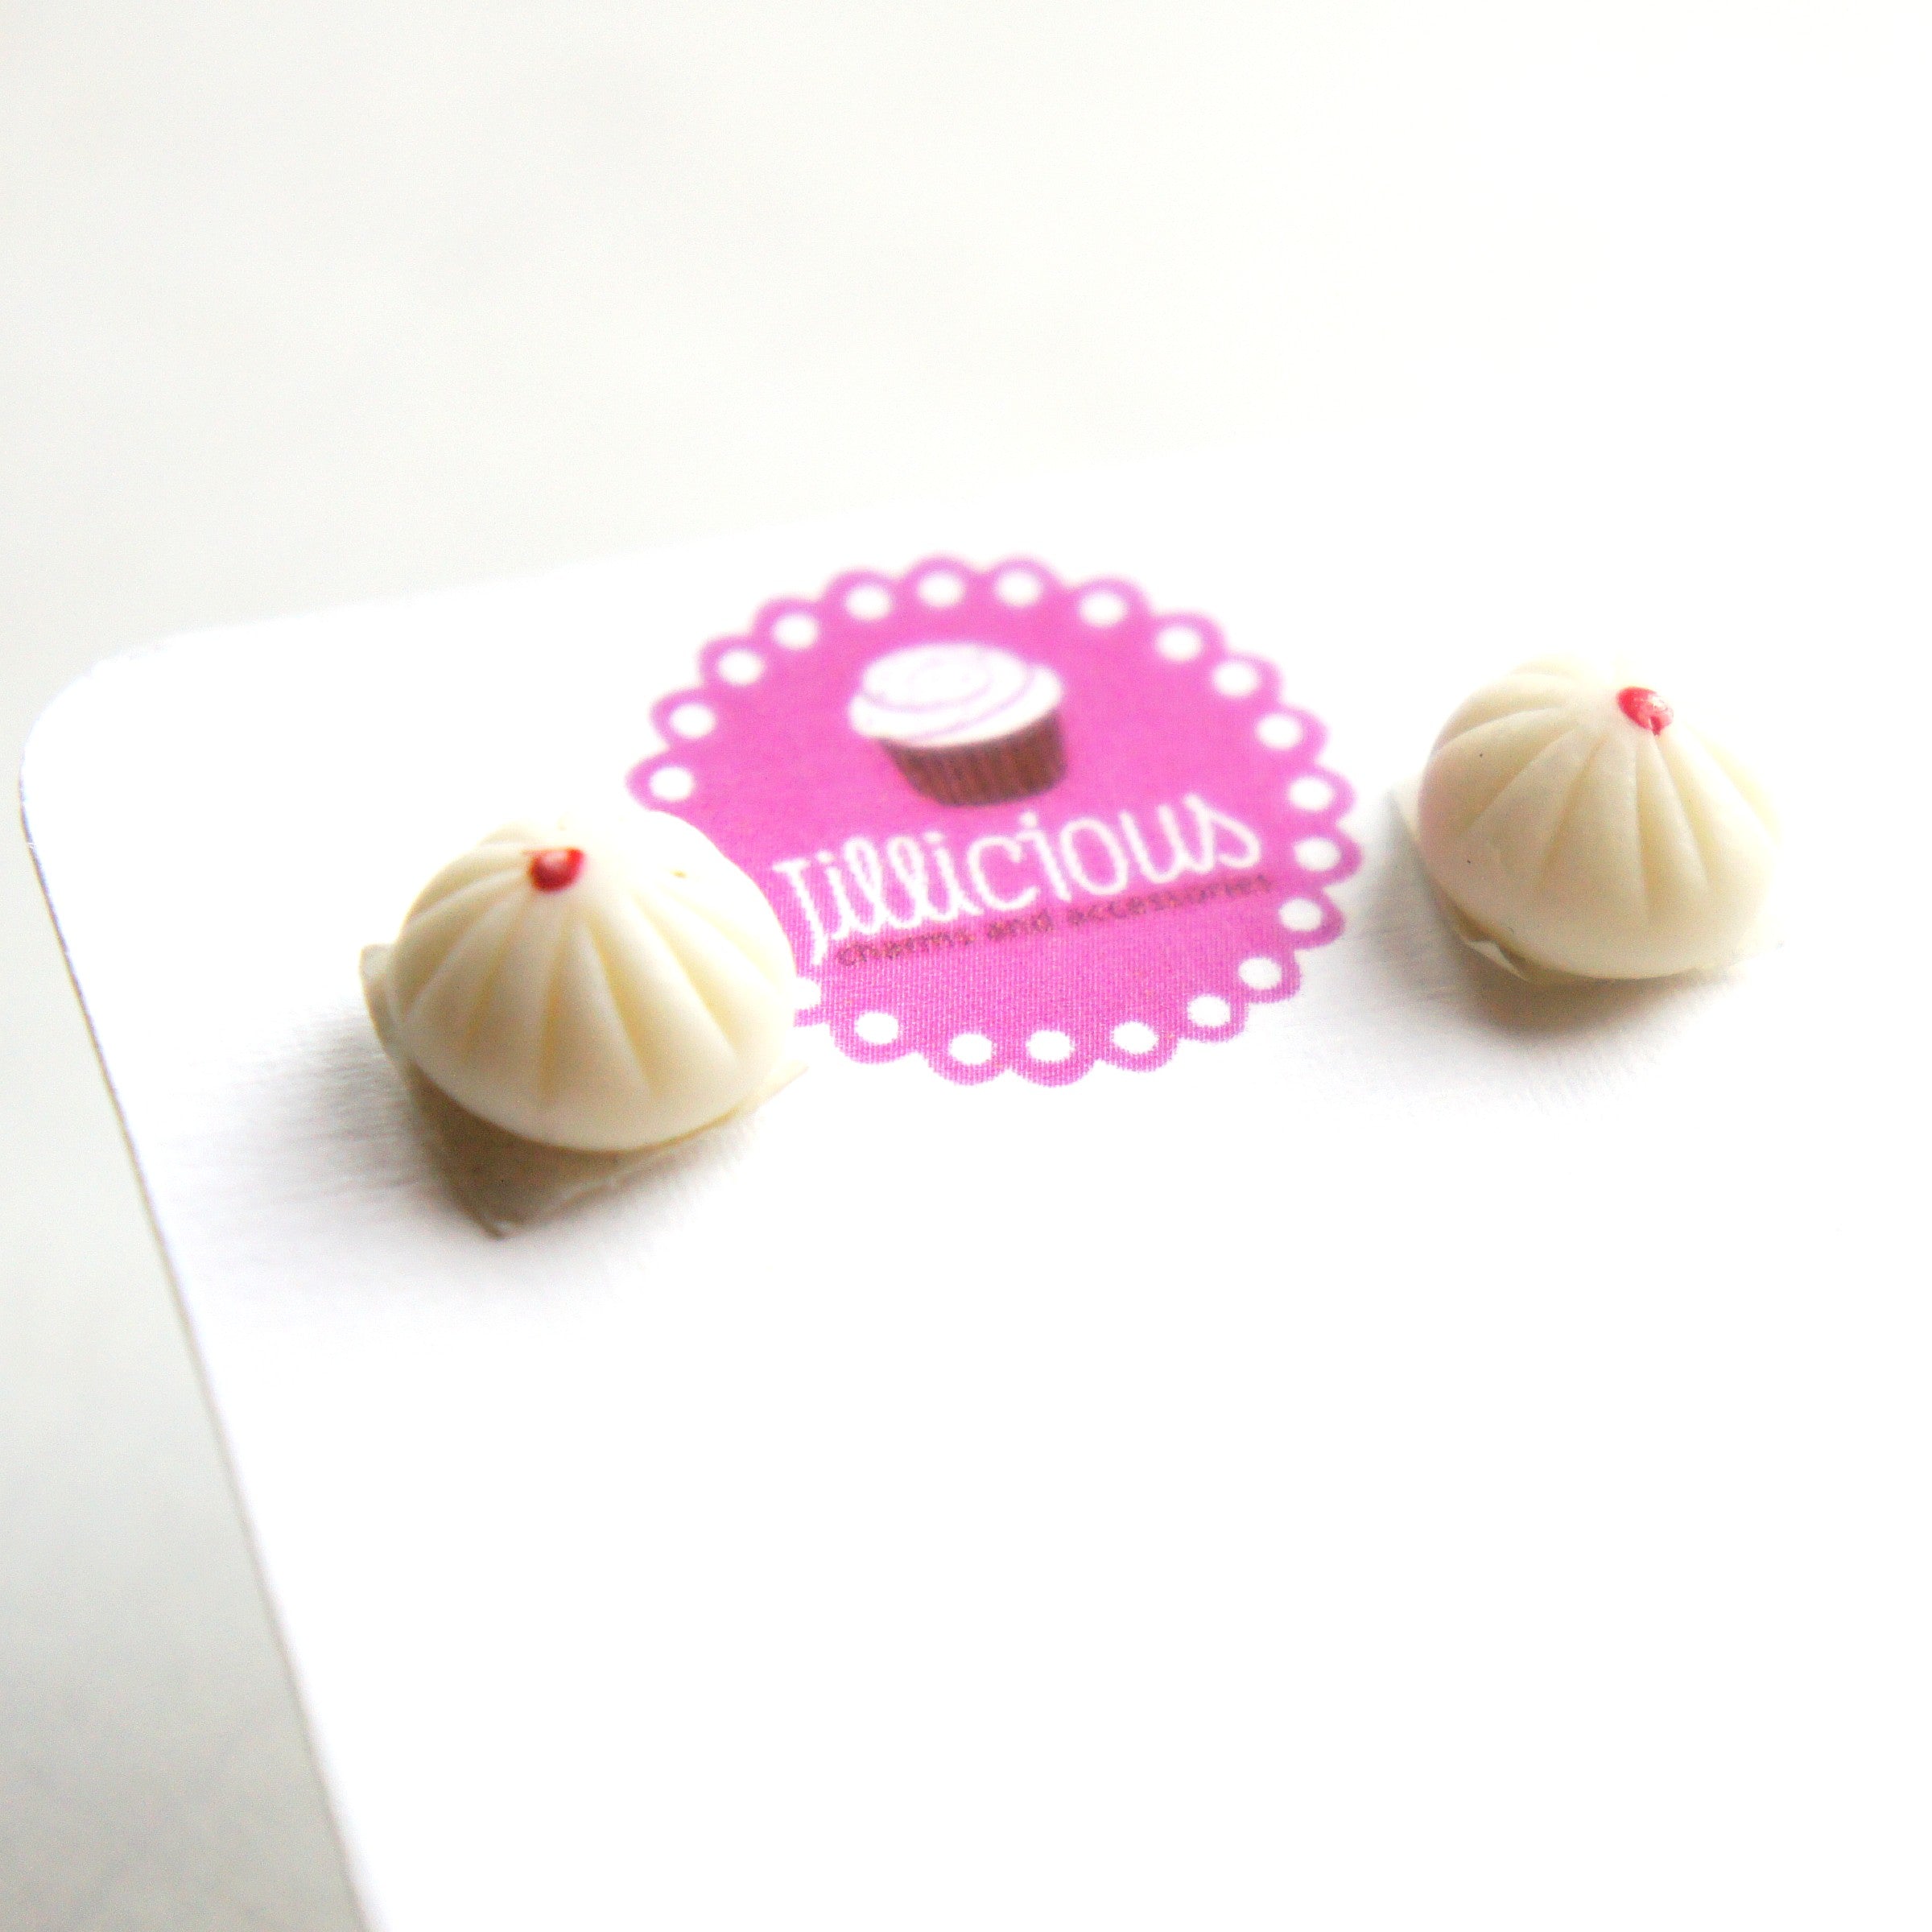 Steamed Buns Stud Earrings - Jillicious charms and accessories